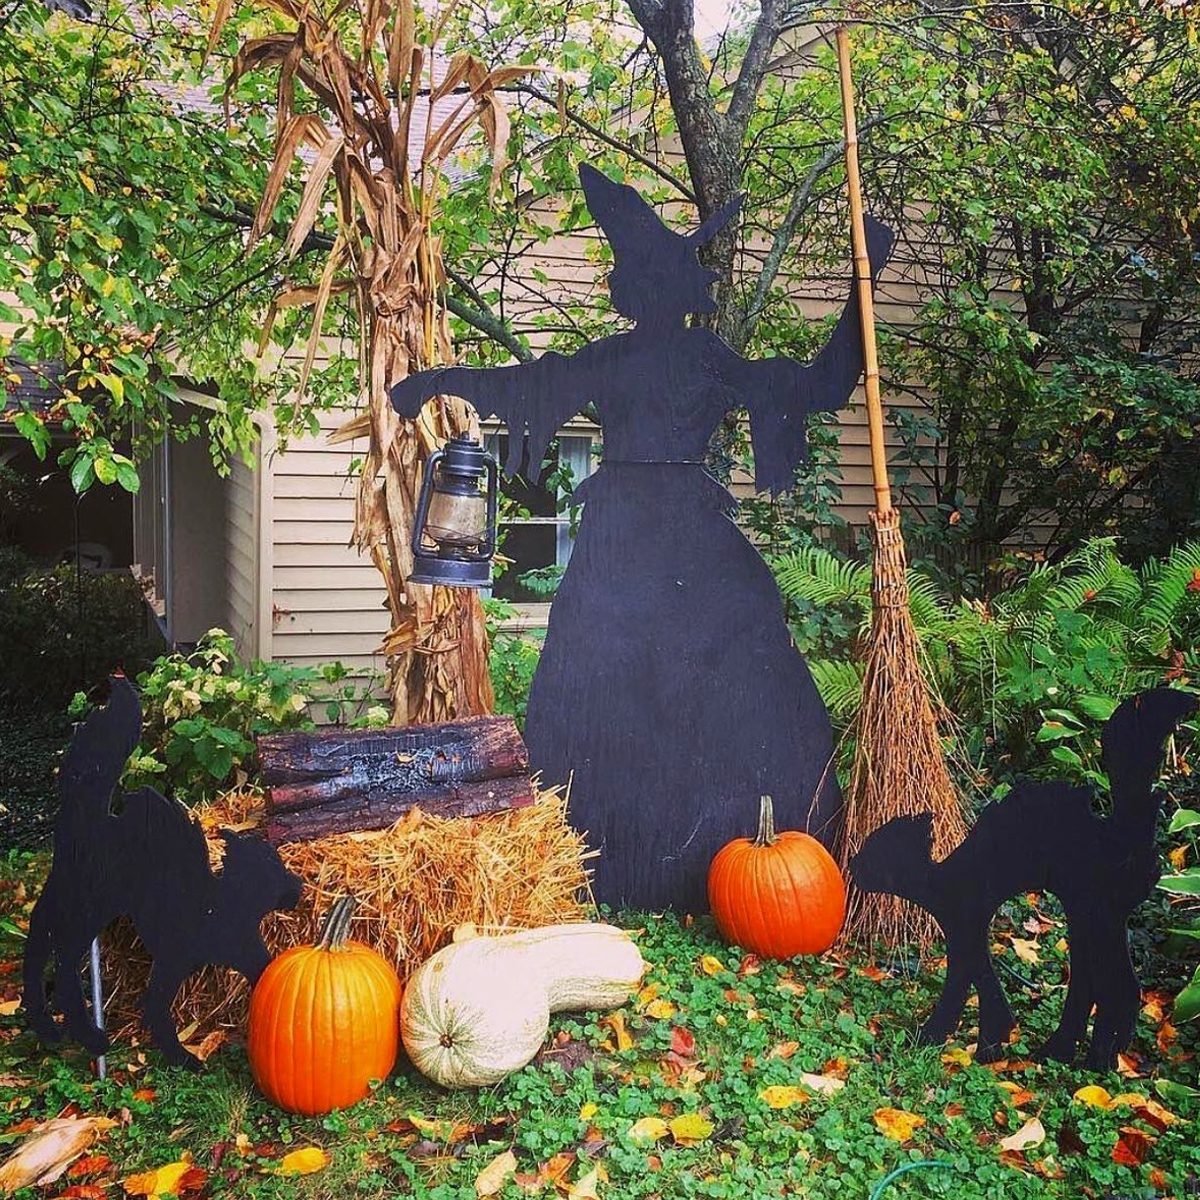 10 Landscaping Ideas To Make Your Home Stand Out for Halloween